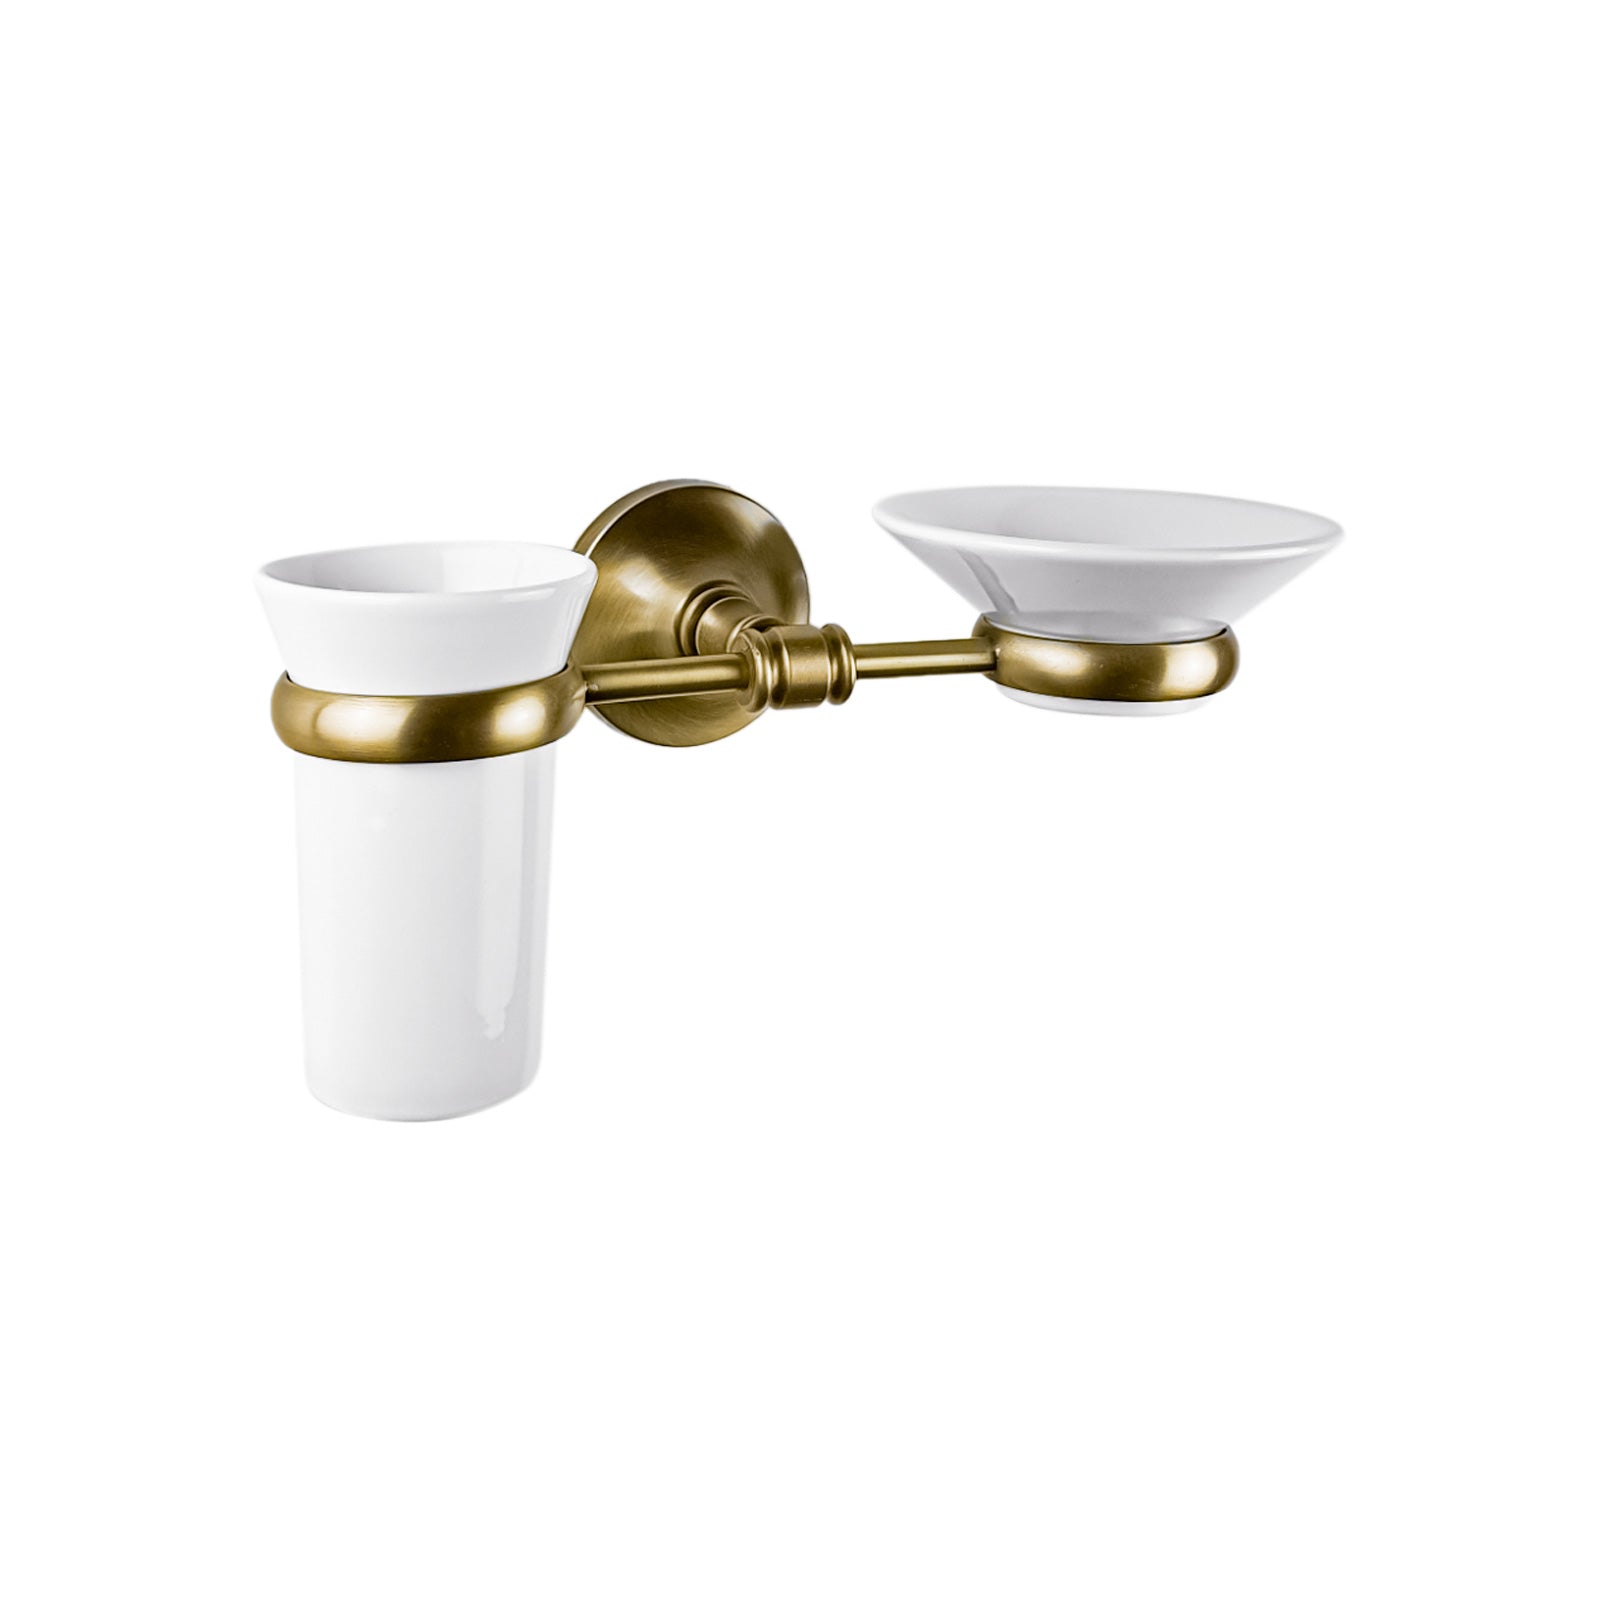 Napie 53012_53020.09_53021.09 by WS Bath Collections, Wall Mounted Ceramic  Soap Dish and Toothbrush Holder Set with Polished Chrome Holder